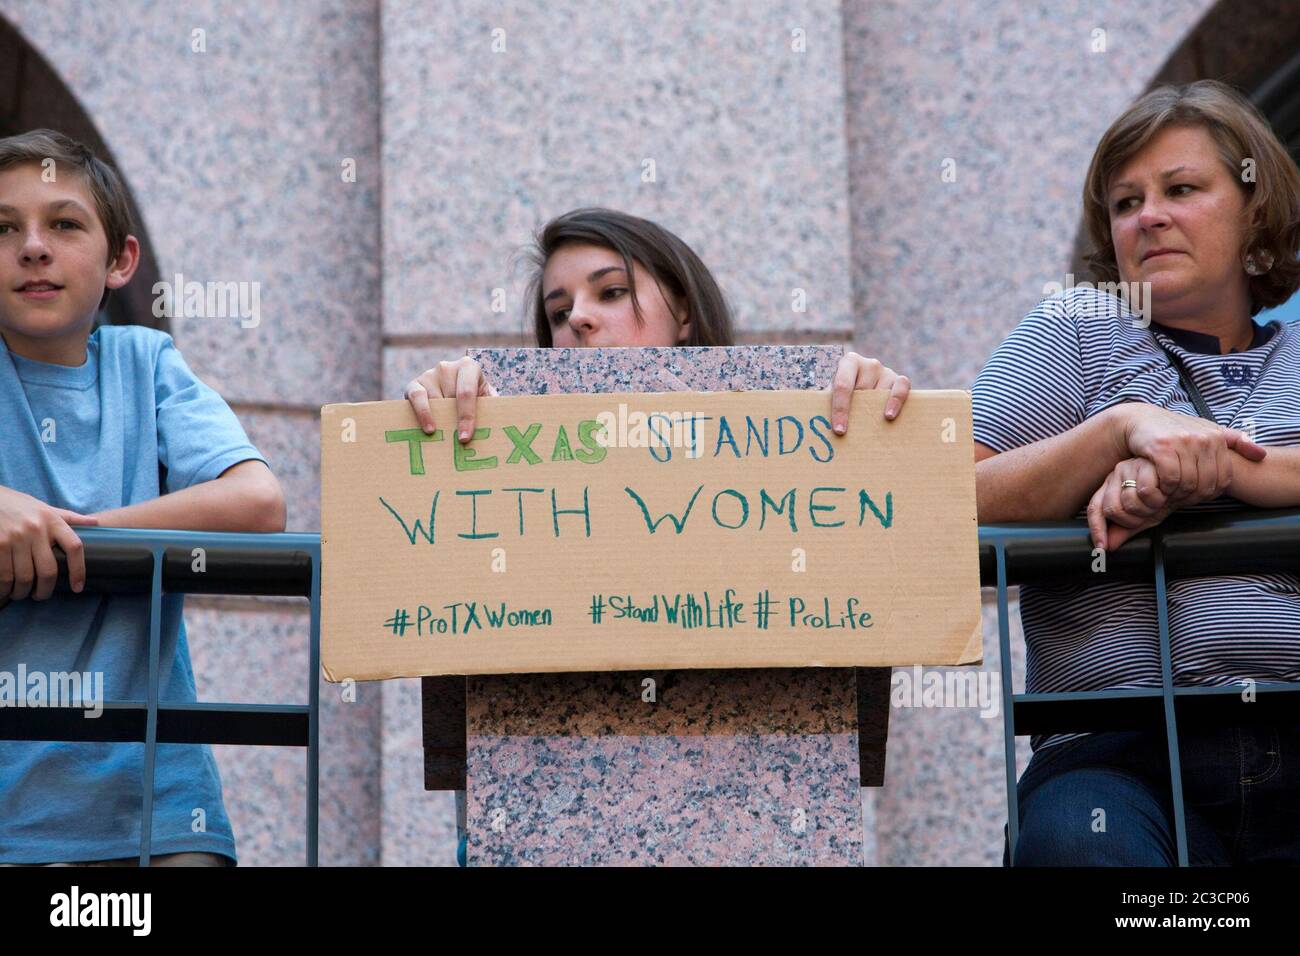 July 2, 2013 Austin, Texas USA: During competing rallies at the Texas Capitol, a young woman holds a hand-made sign opposing abortion and supporting anti-abortion legislation as the House Committee on State Affairs holds hearings on a controversial abortion bill. ©MKC/Bob Daemmrich Photography, Inc. Stock Photo